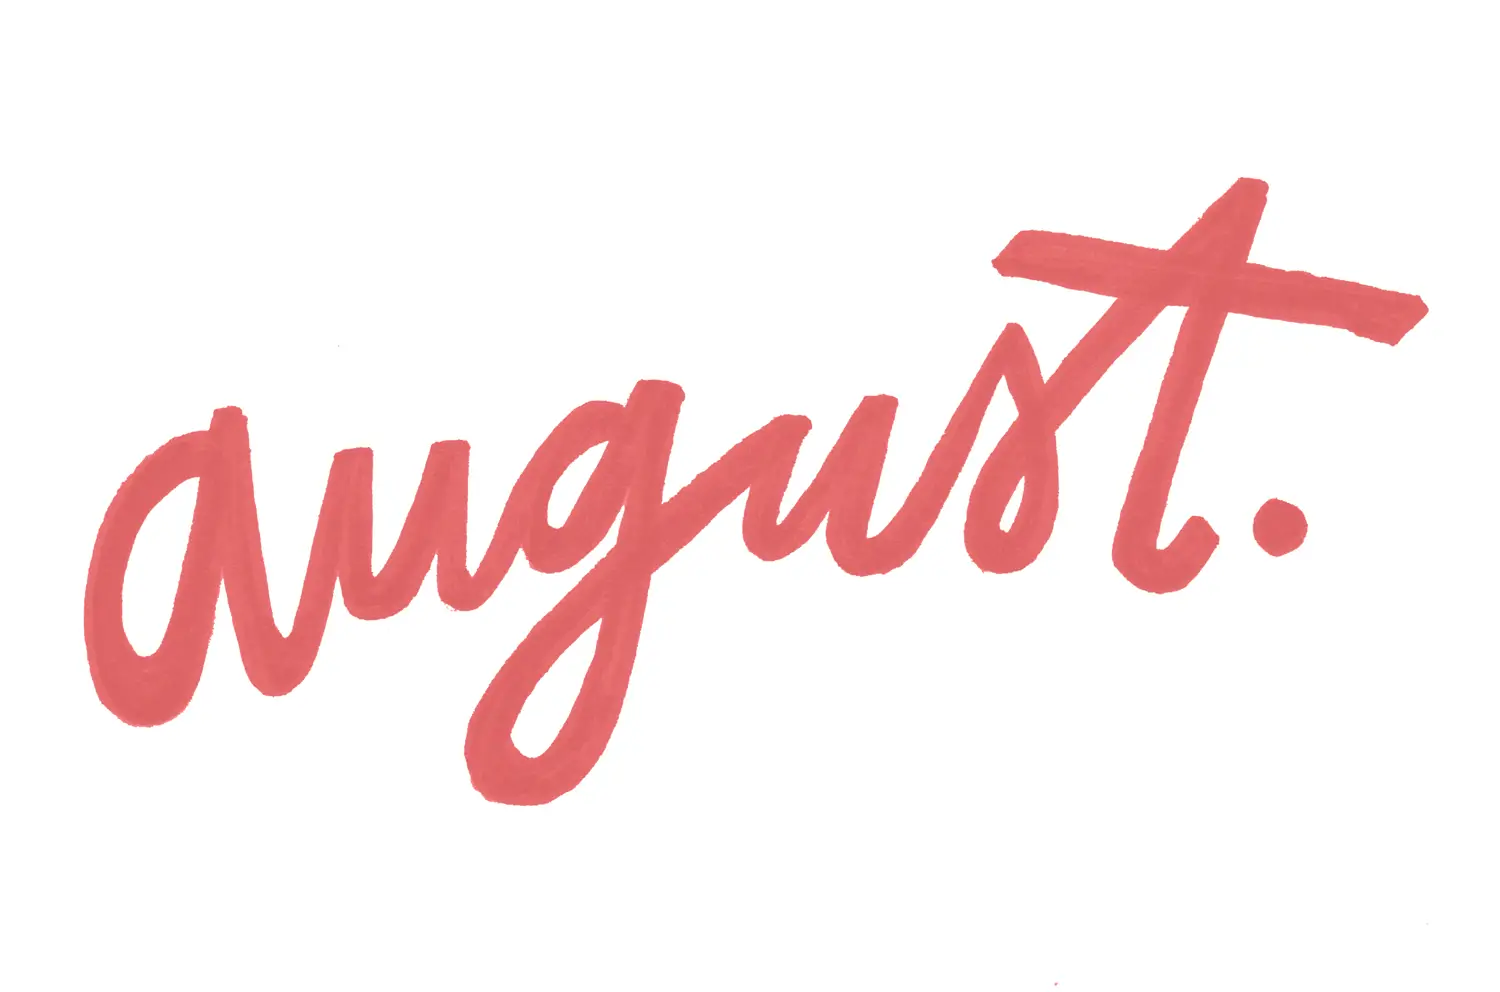 "August 2019 Social Security Payment Schedule"